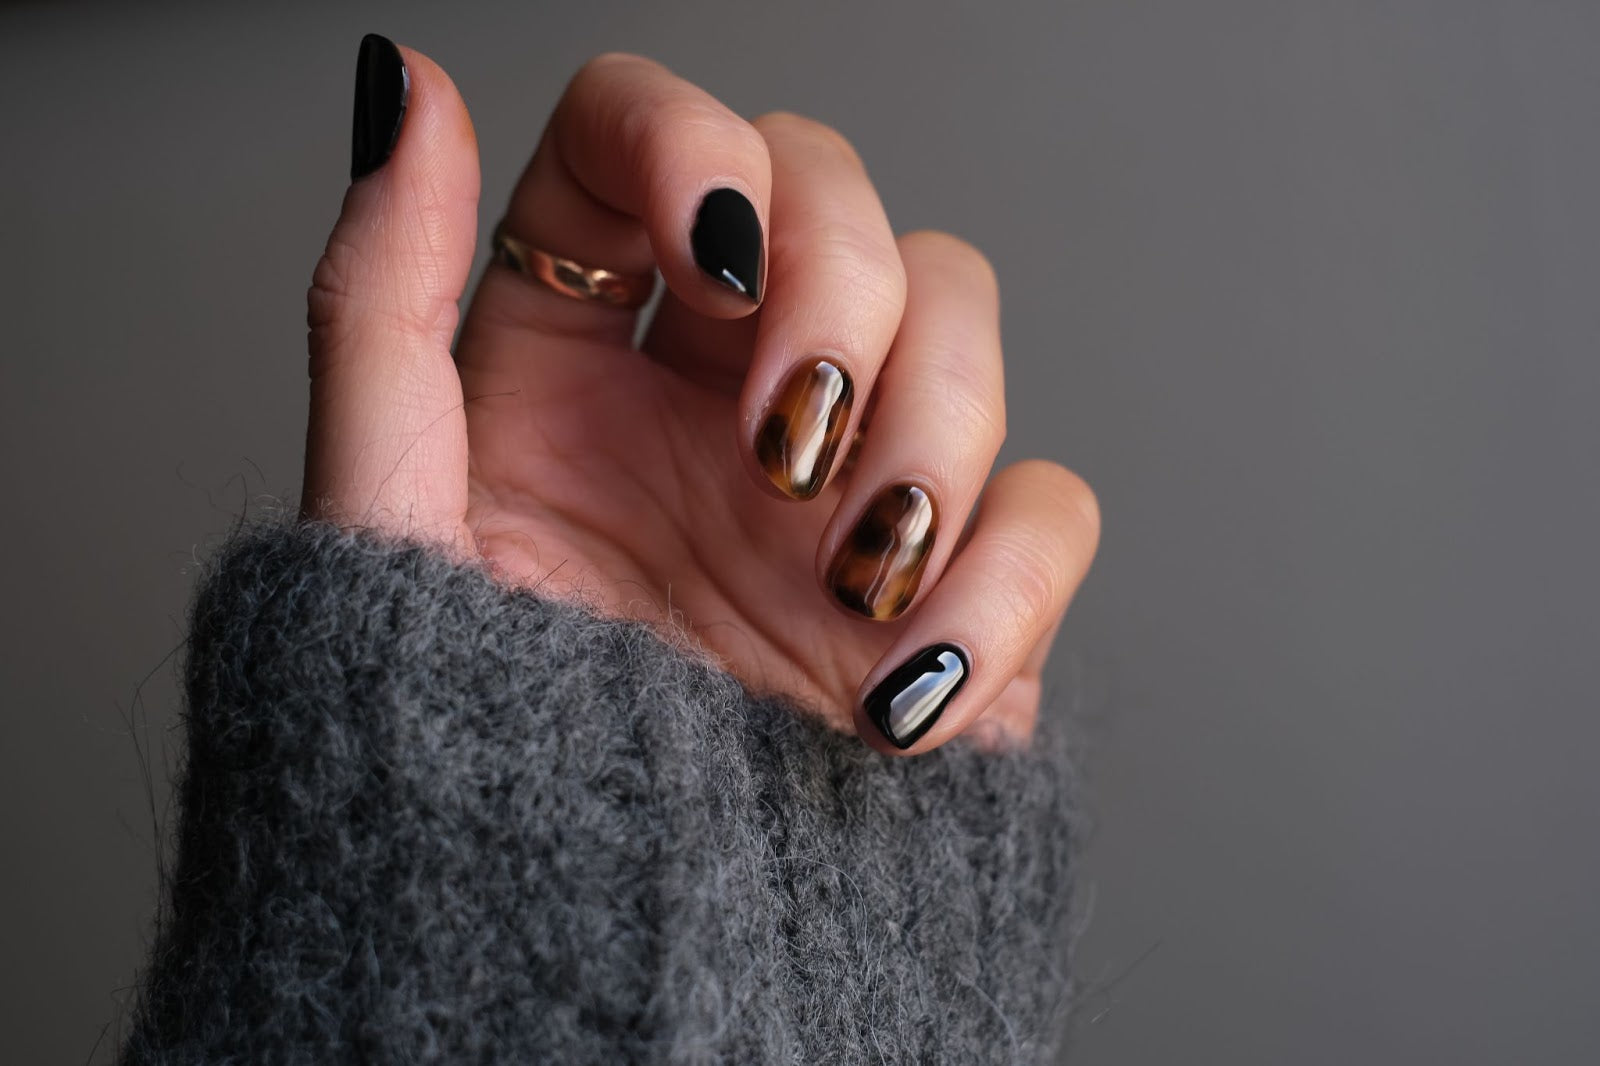 Marble is the most popular nail art design on Instagram